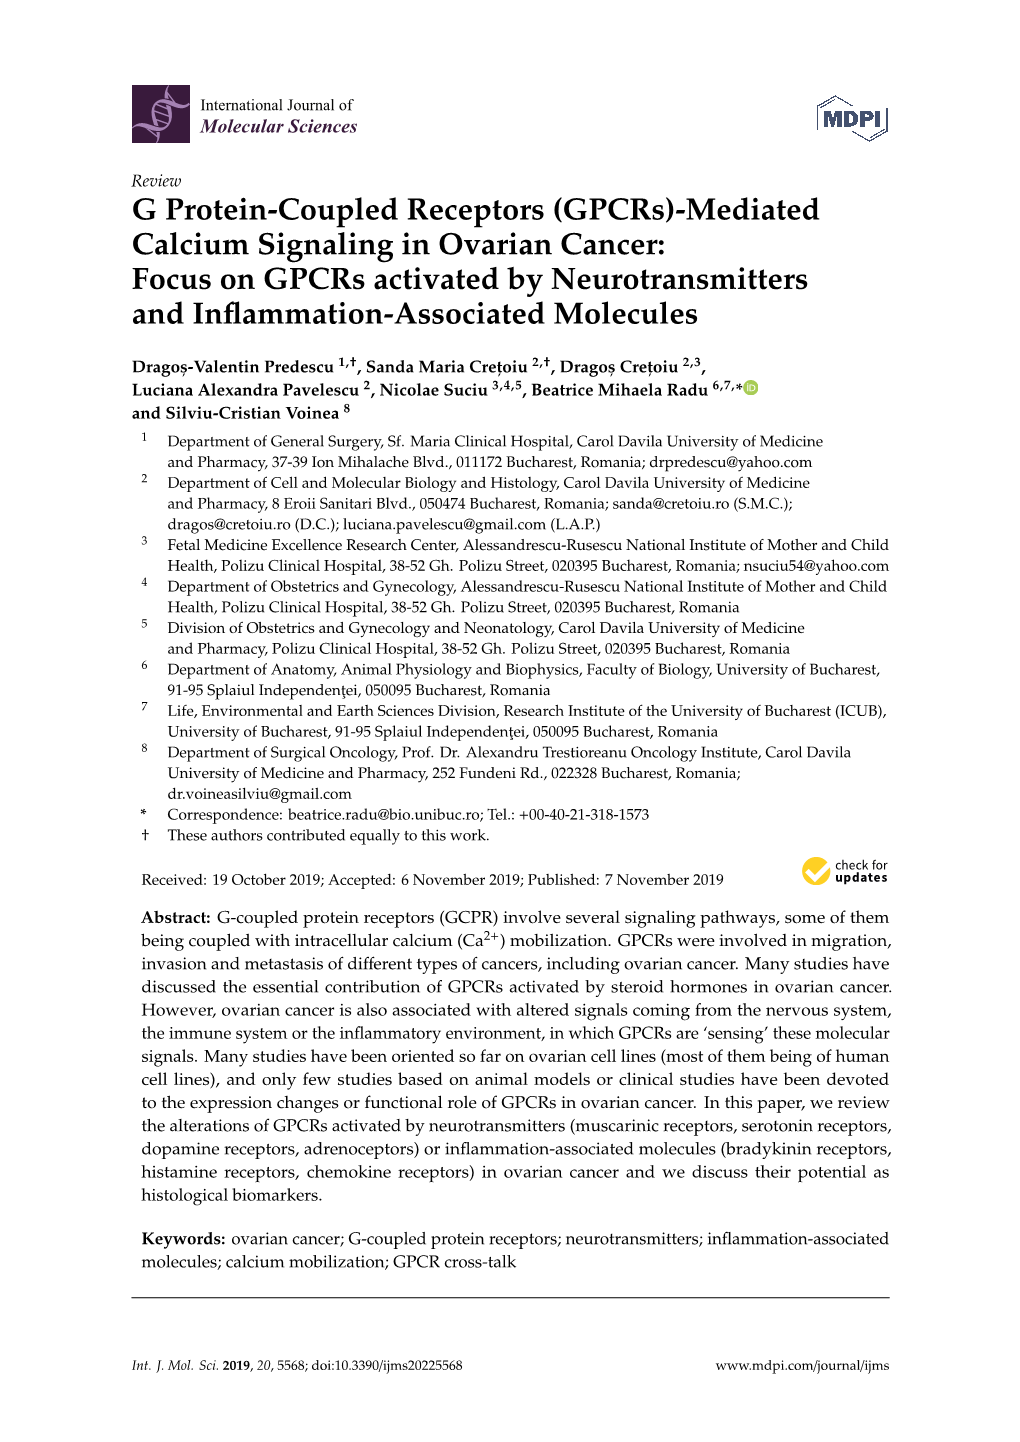 (Gpcrs)-Mediated Calcium Signaling in Ovarian Cancer: Focus on Gpcrs Activated by Neurotransmitters and Inﬂammation-Associated Molecules